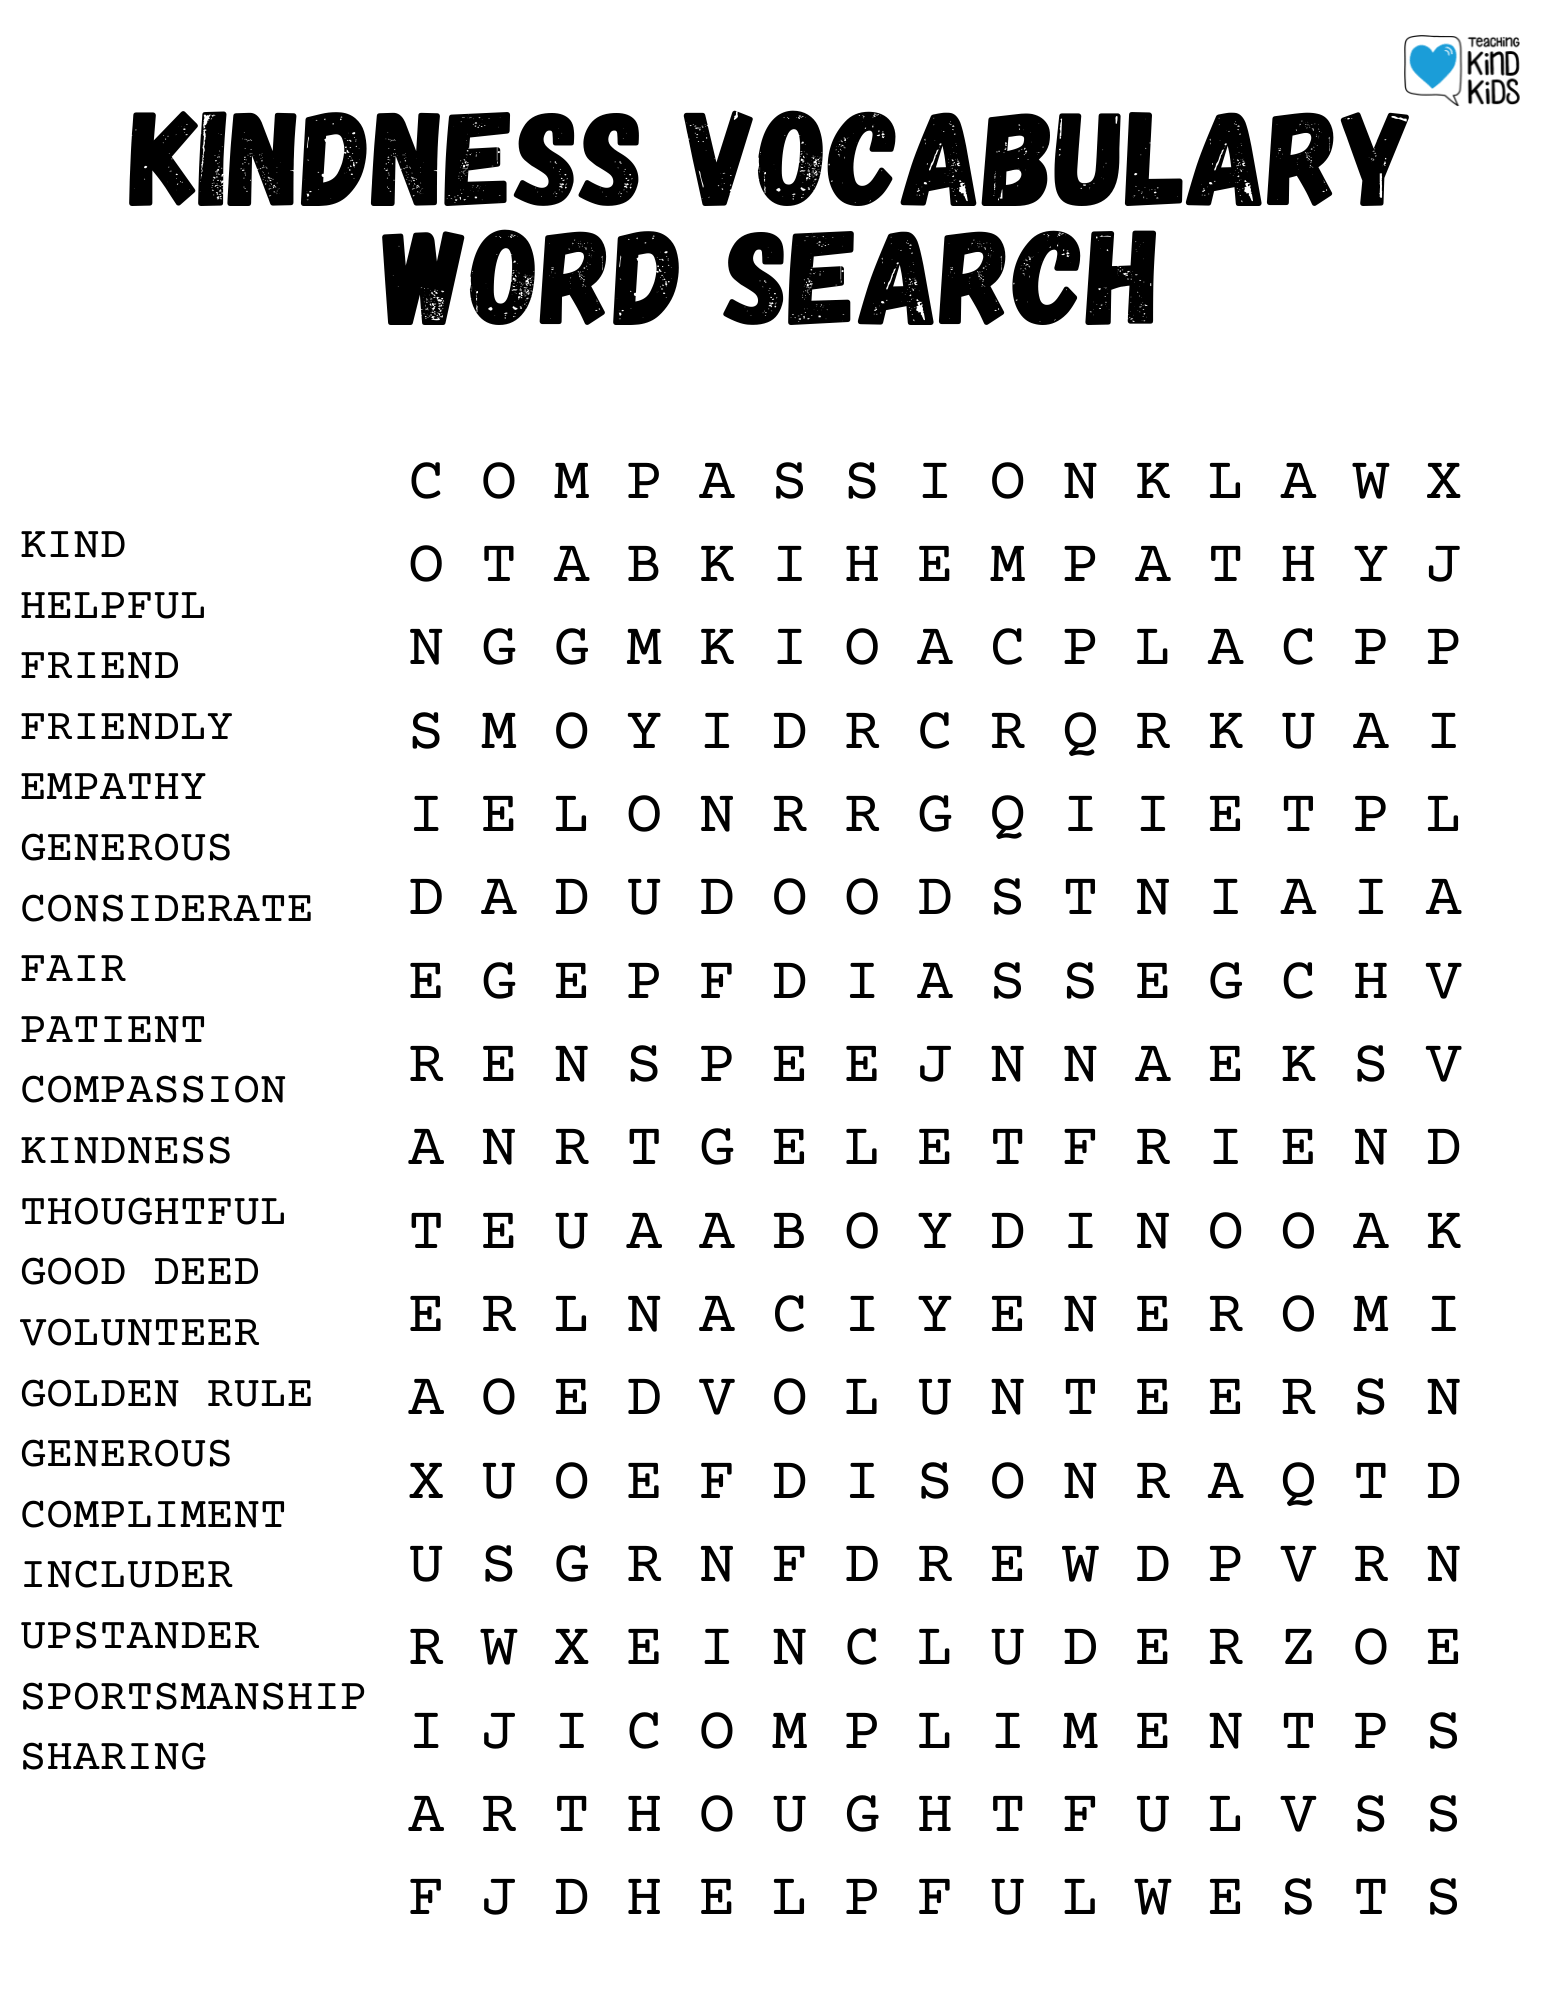 Kindness wordsearch is a fun way to reinforce sel concepts when teaching kindness.